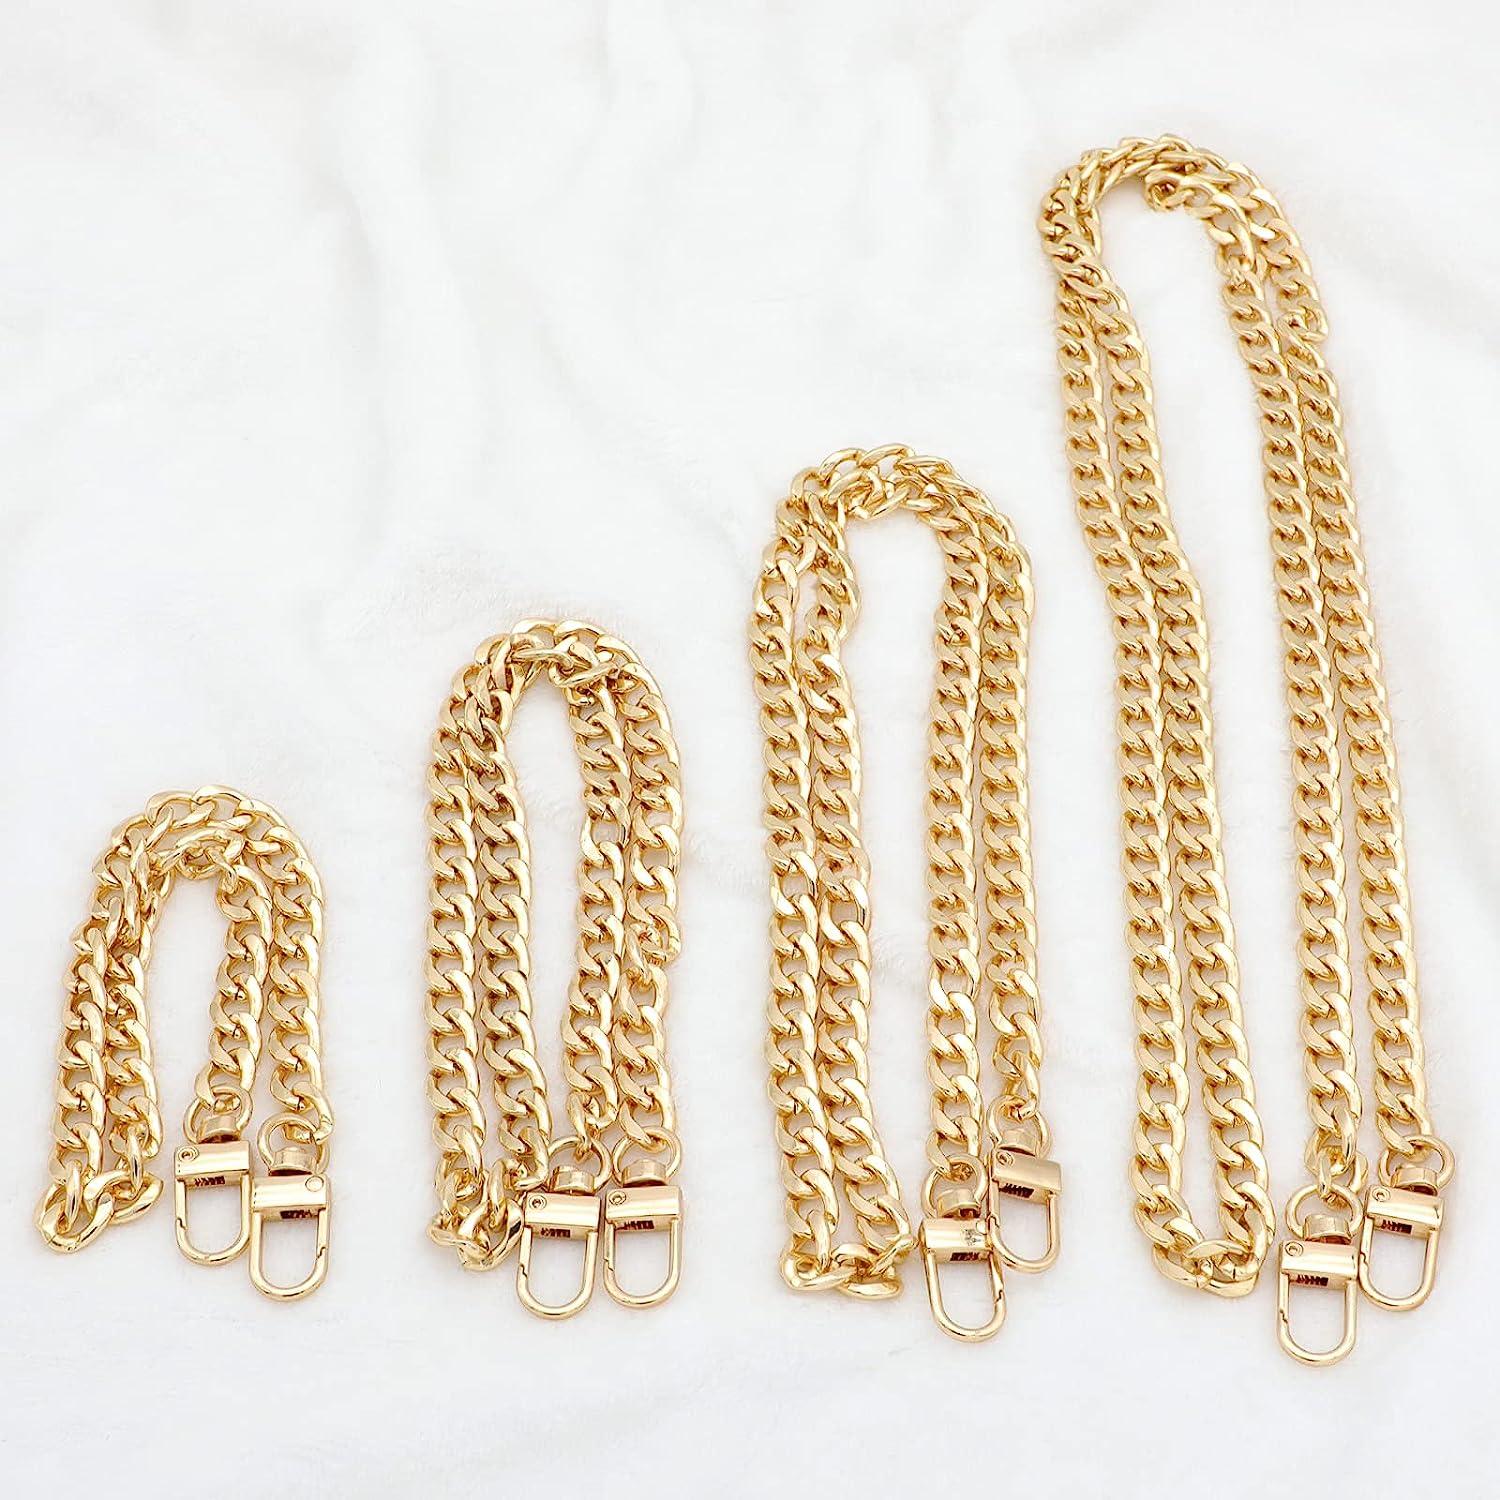 5 Different Sizes Purse Chain, Gold Handbag Flat Iron Chains with Metal  Buckles, Shiny and Attach Easily Use Comfortable for DIY Purse Handbag